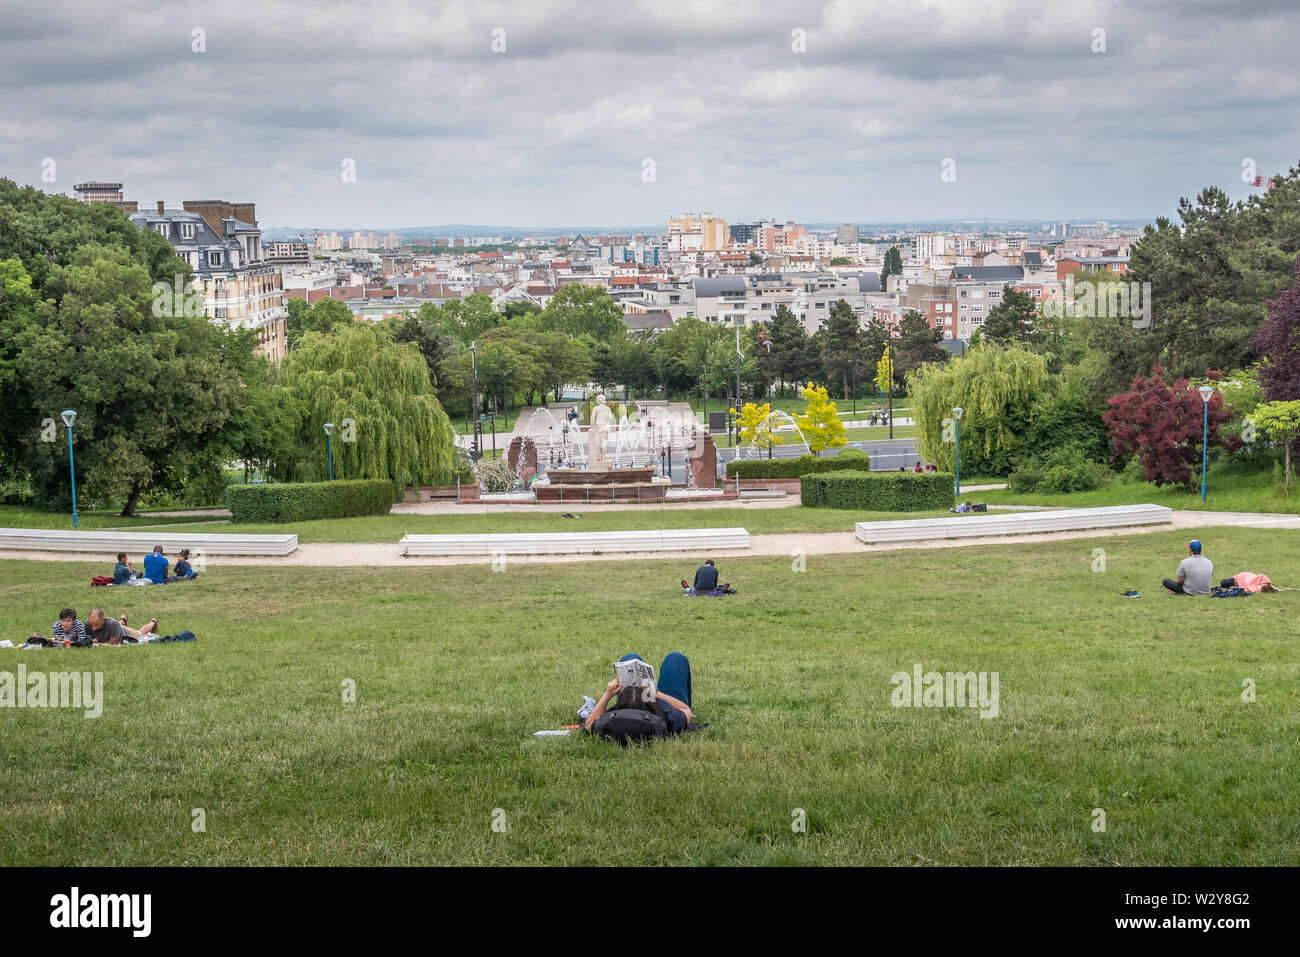 Paris, France - May 26, 2019: Butte du chapeau rouge park in Paris with  people relaxing and reading on the grass Stock Photo - Alamy